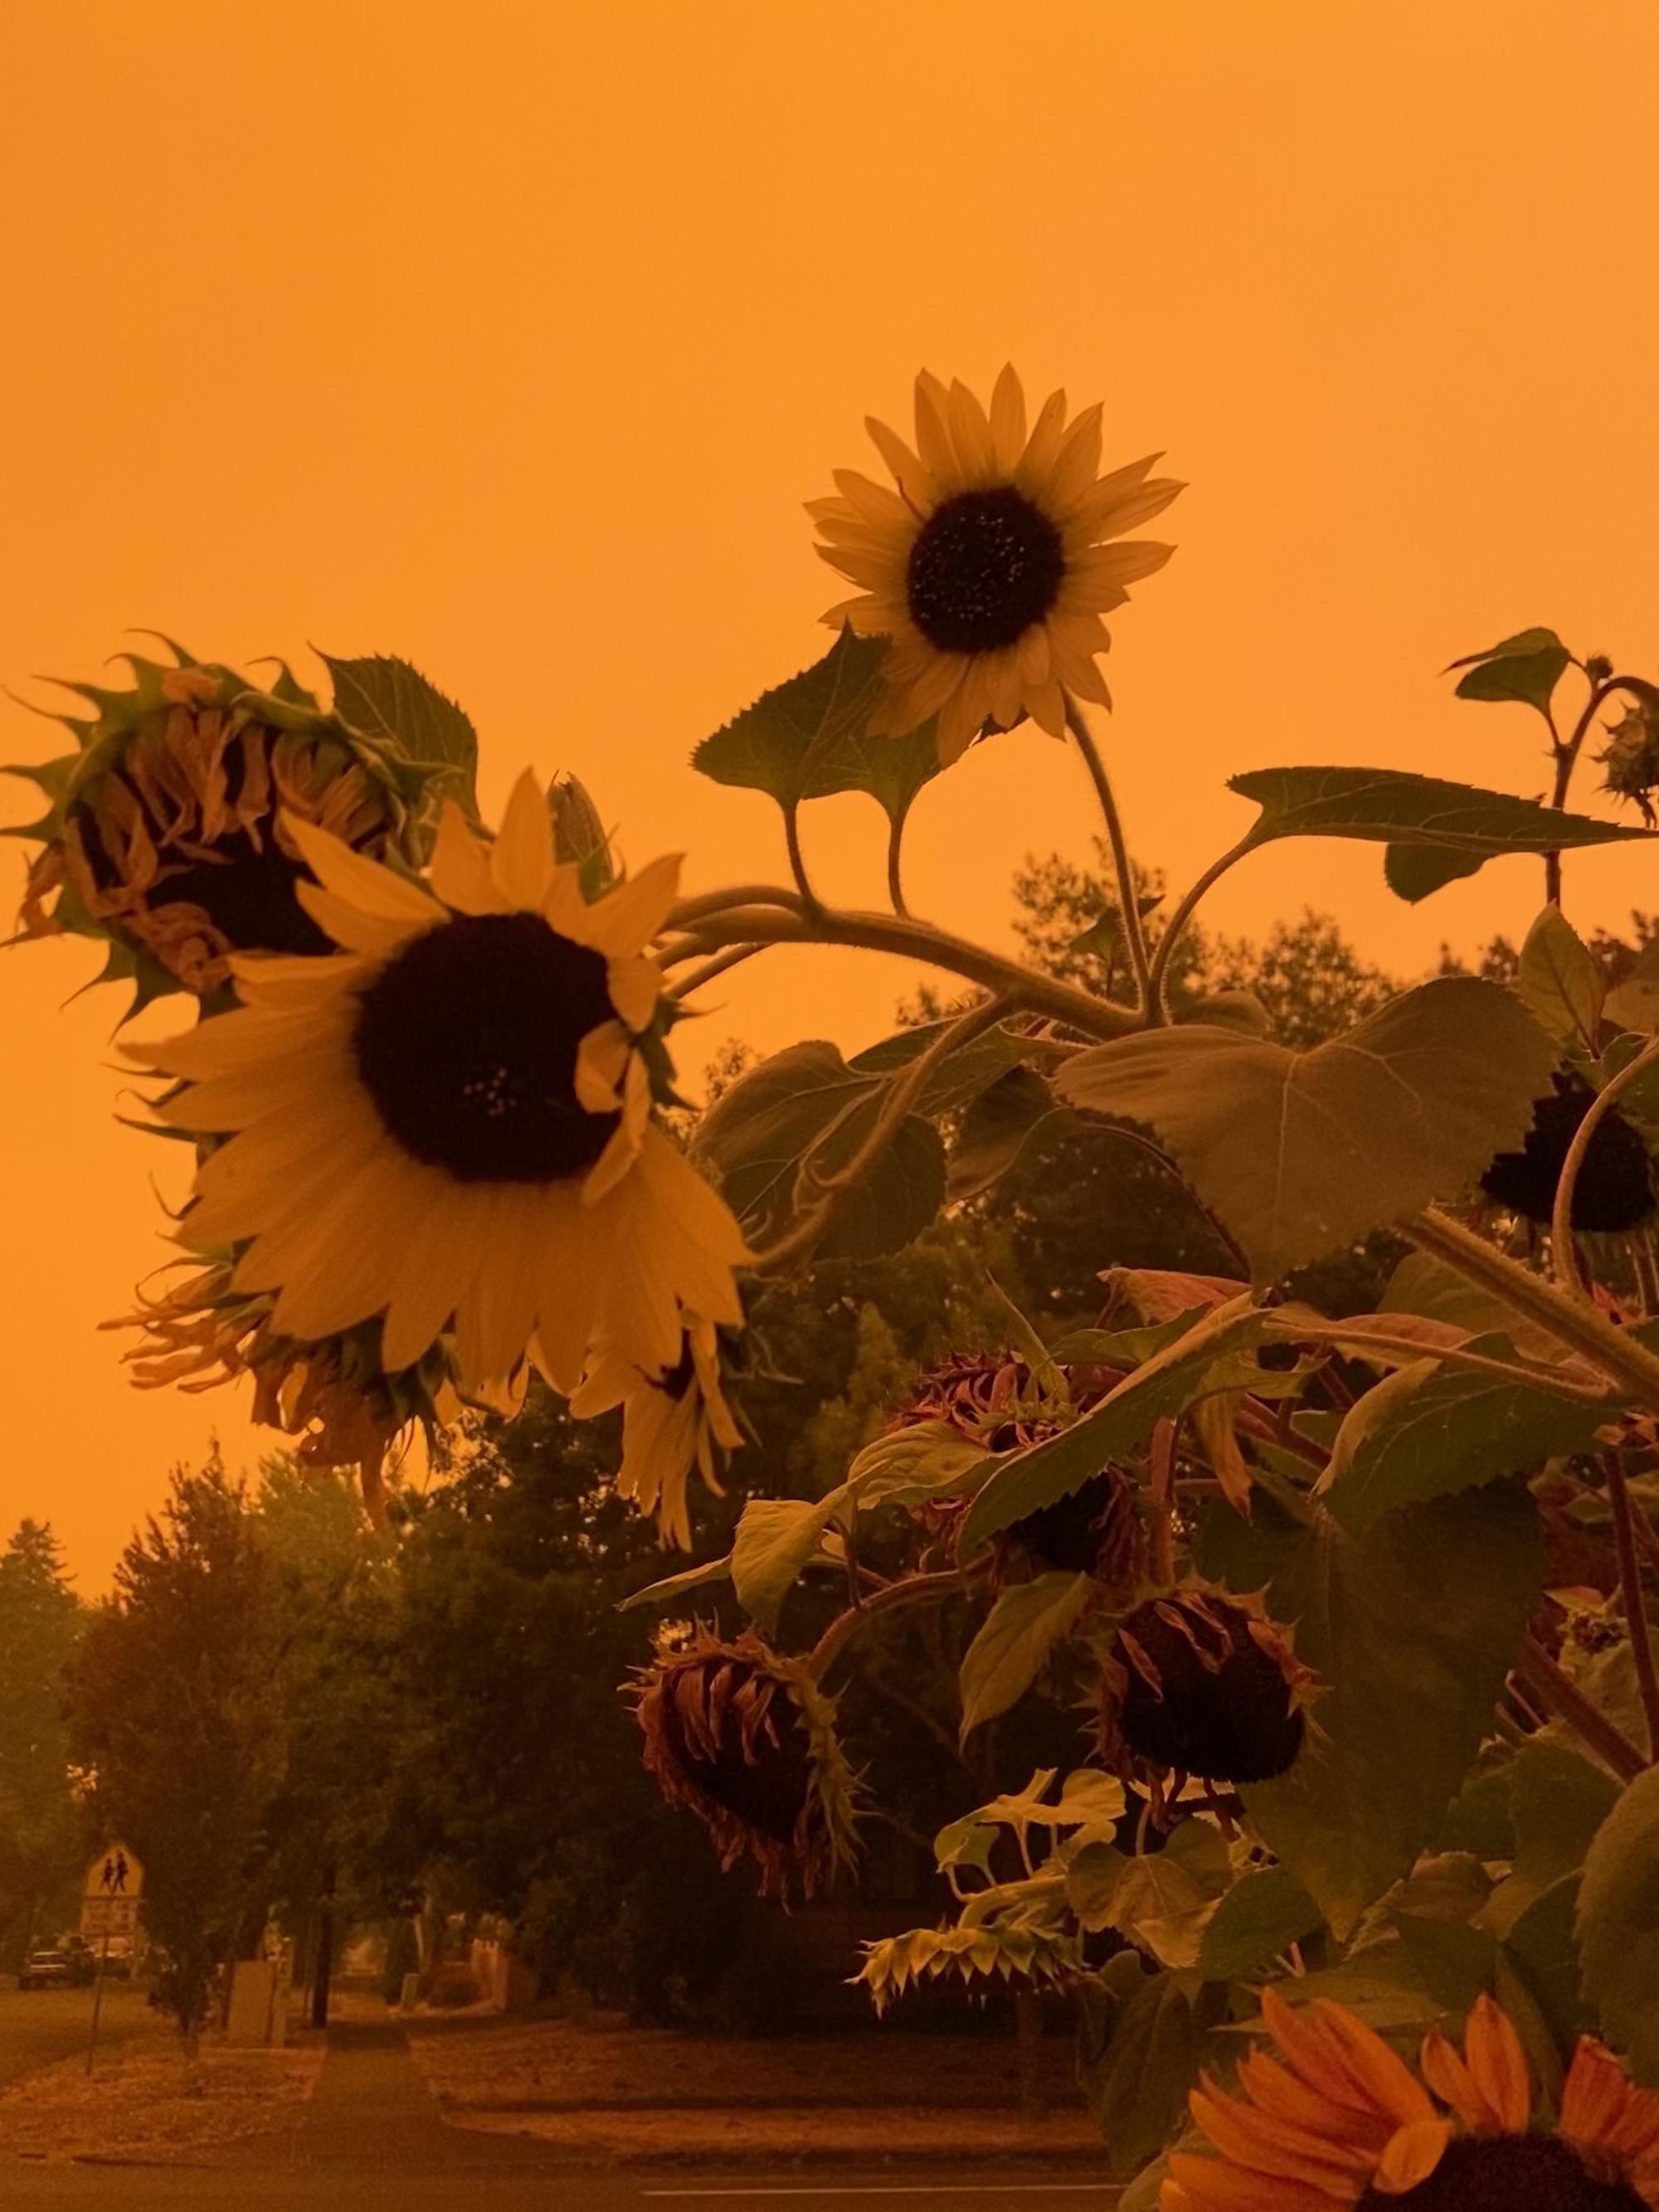 A sunflower plant stands against the smoky, orange sky in Salem.